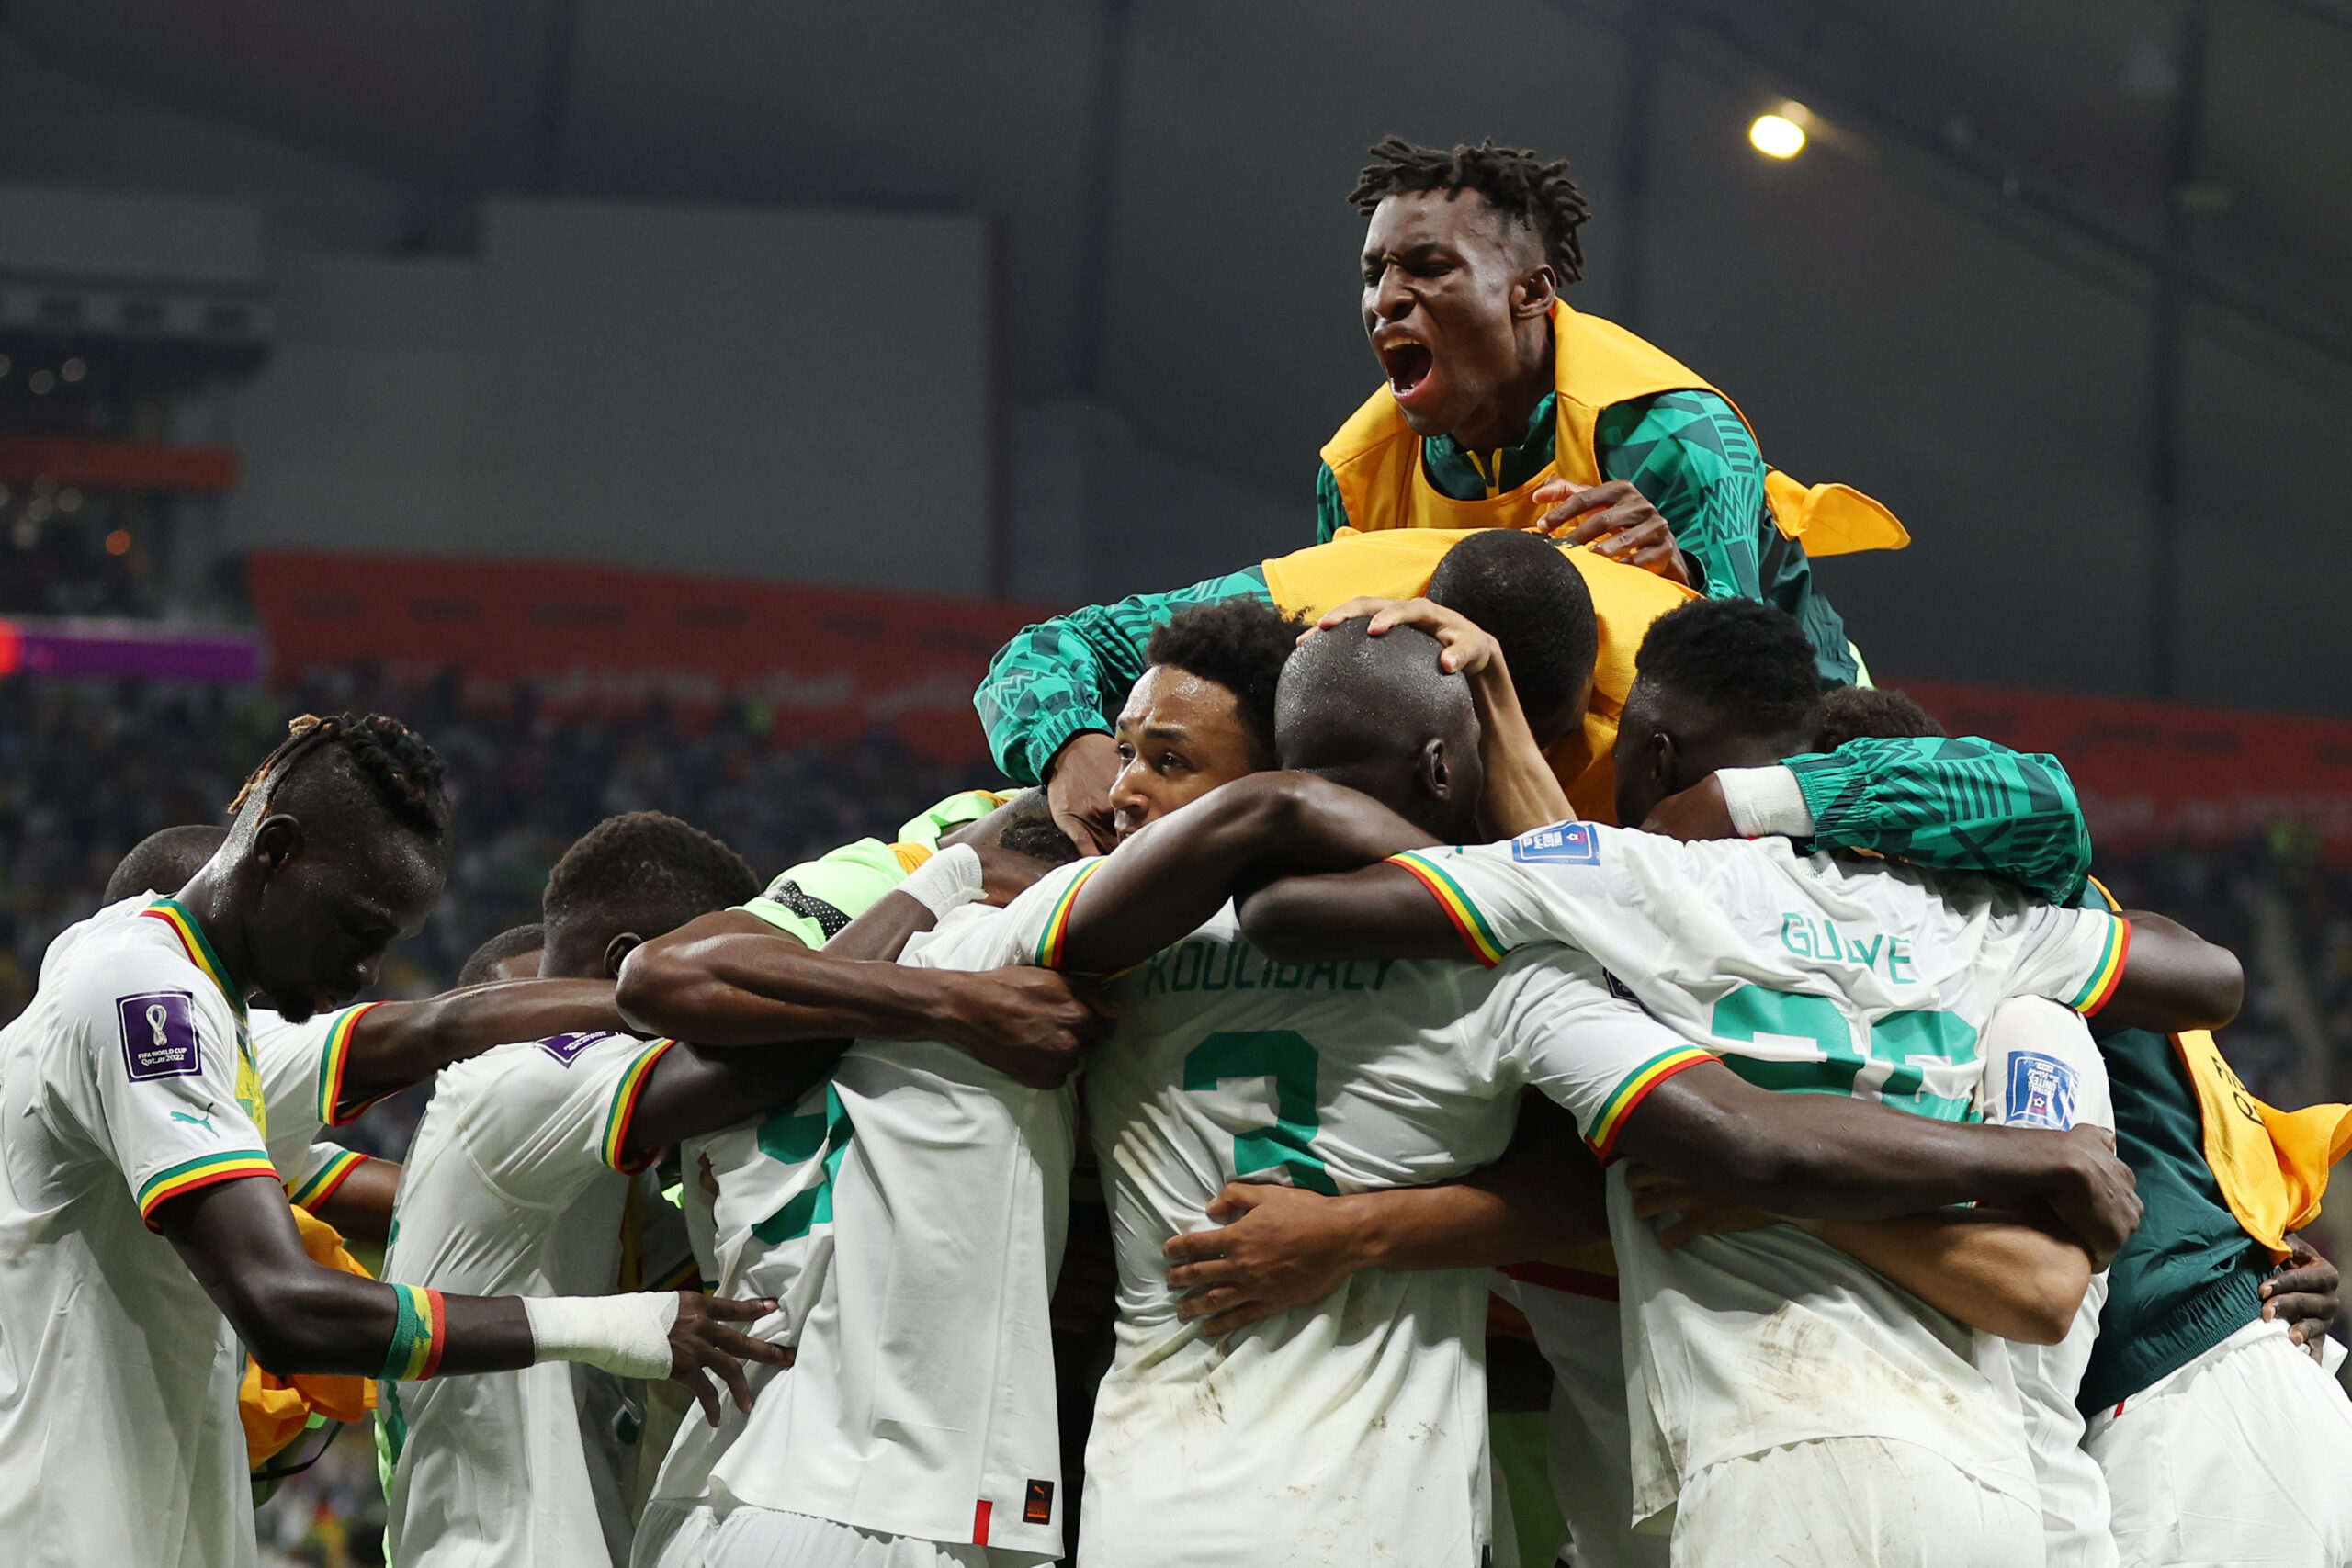 Senegal 2-1 Ecuador; Senegal Qualifies for Round of 16 First Time in 20 Years